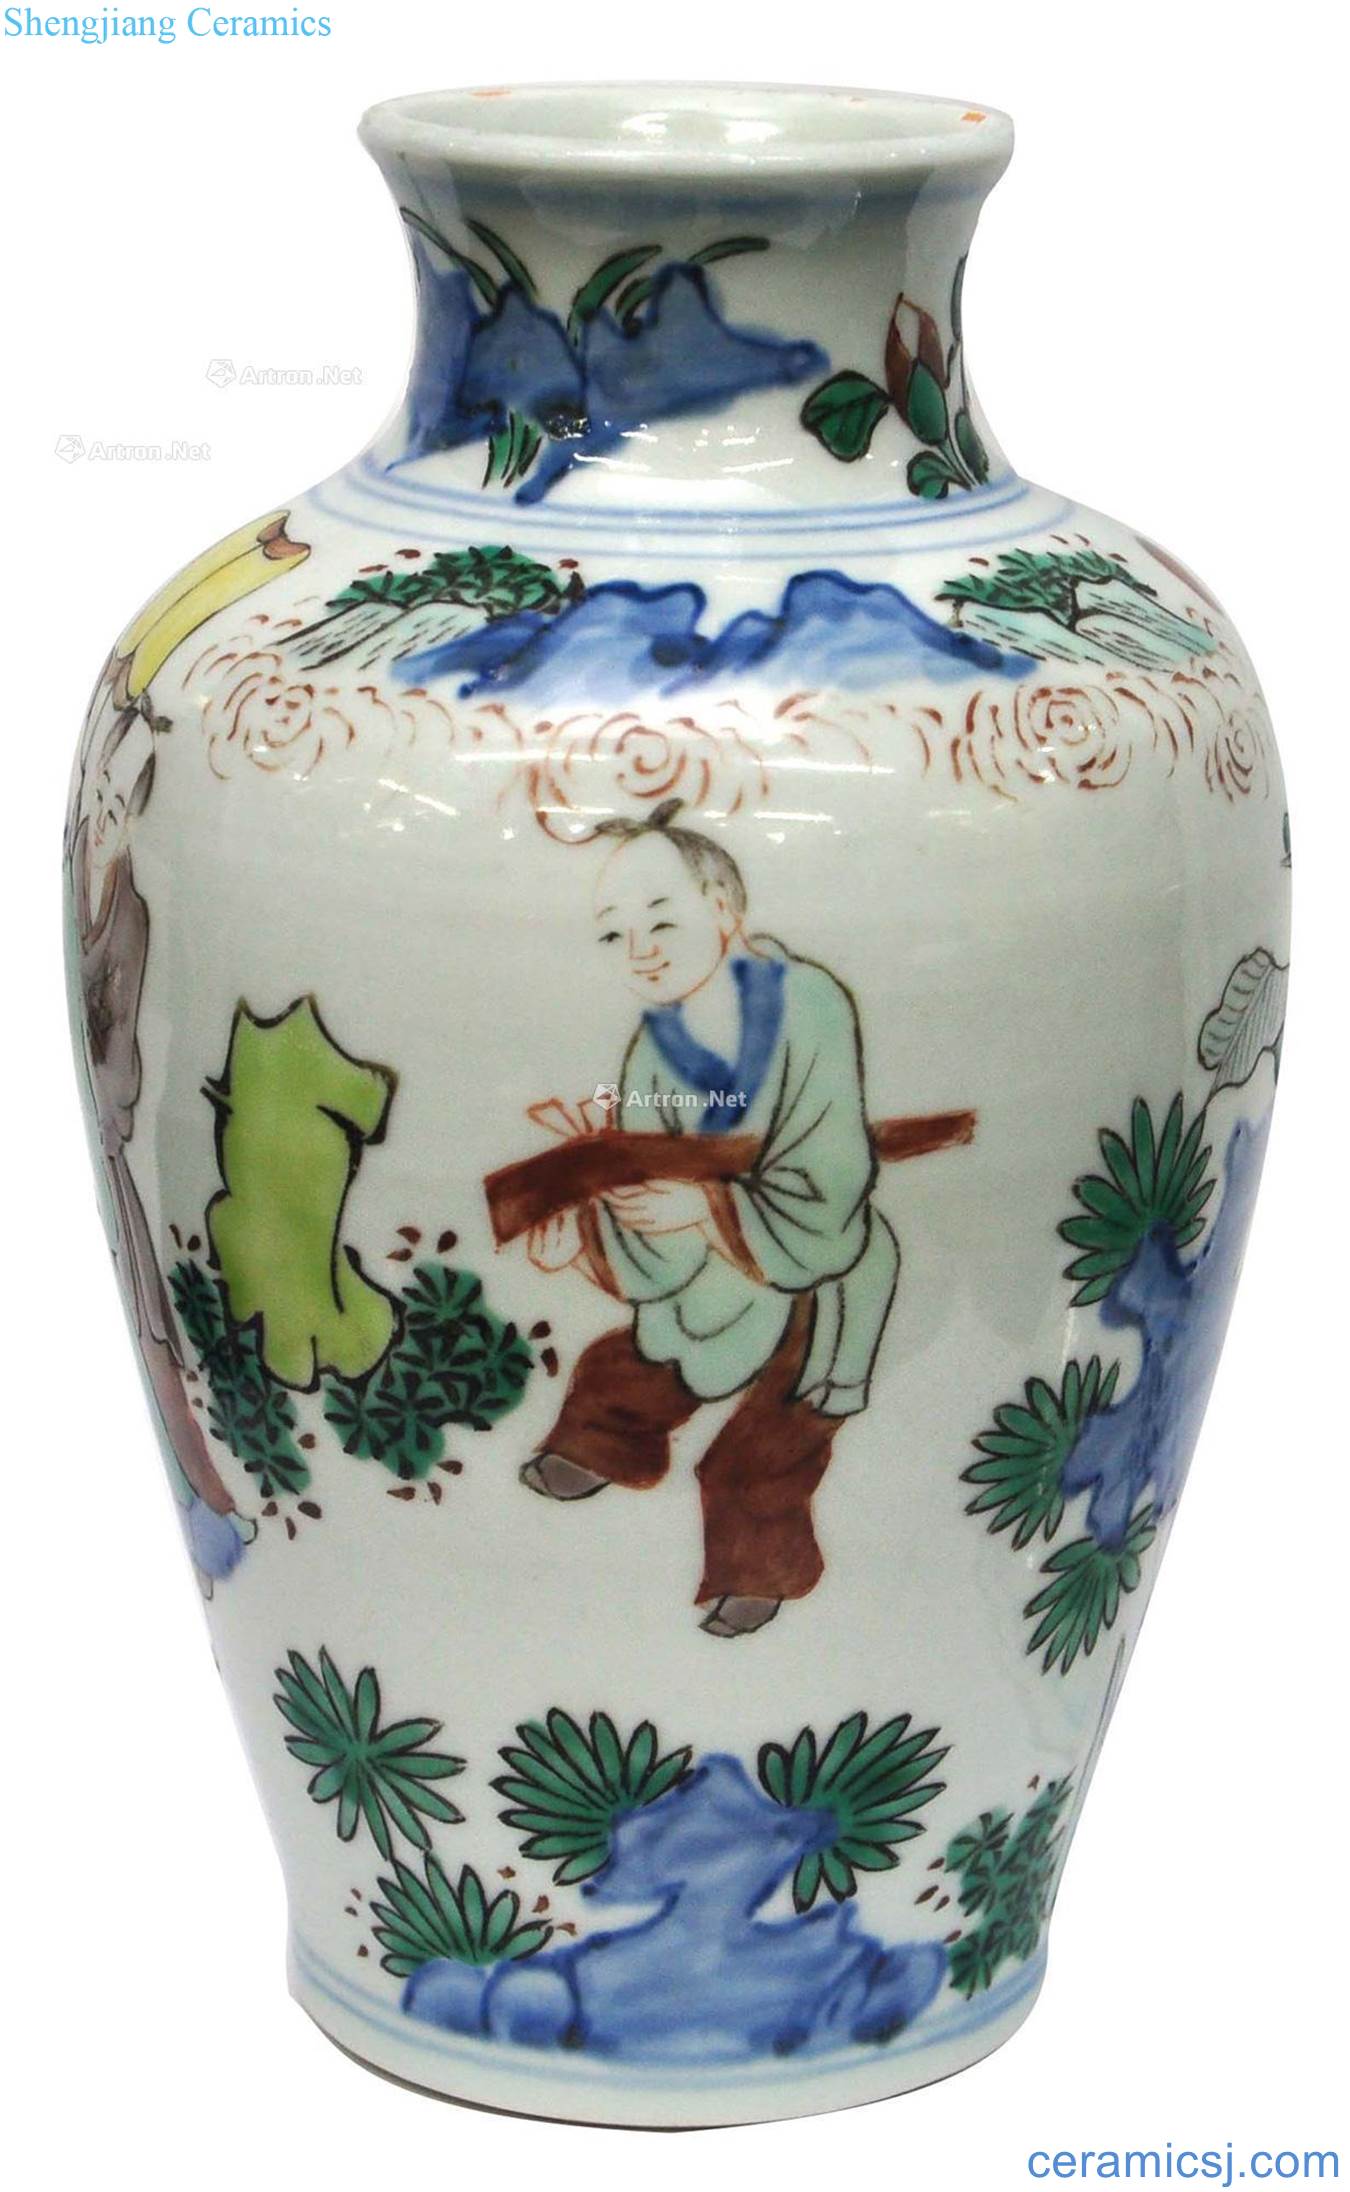 In the early qing mei bottles of colorful characters